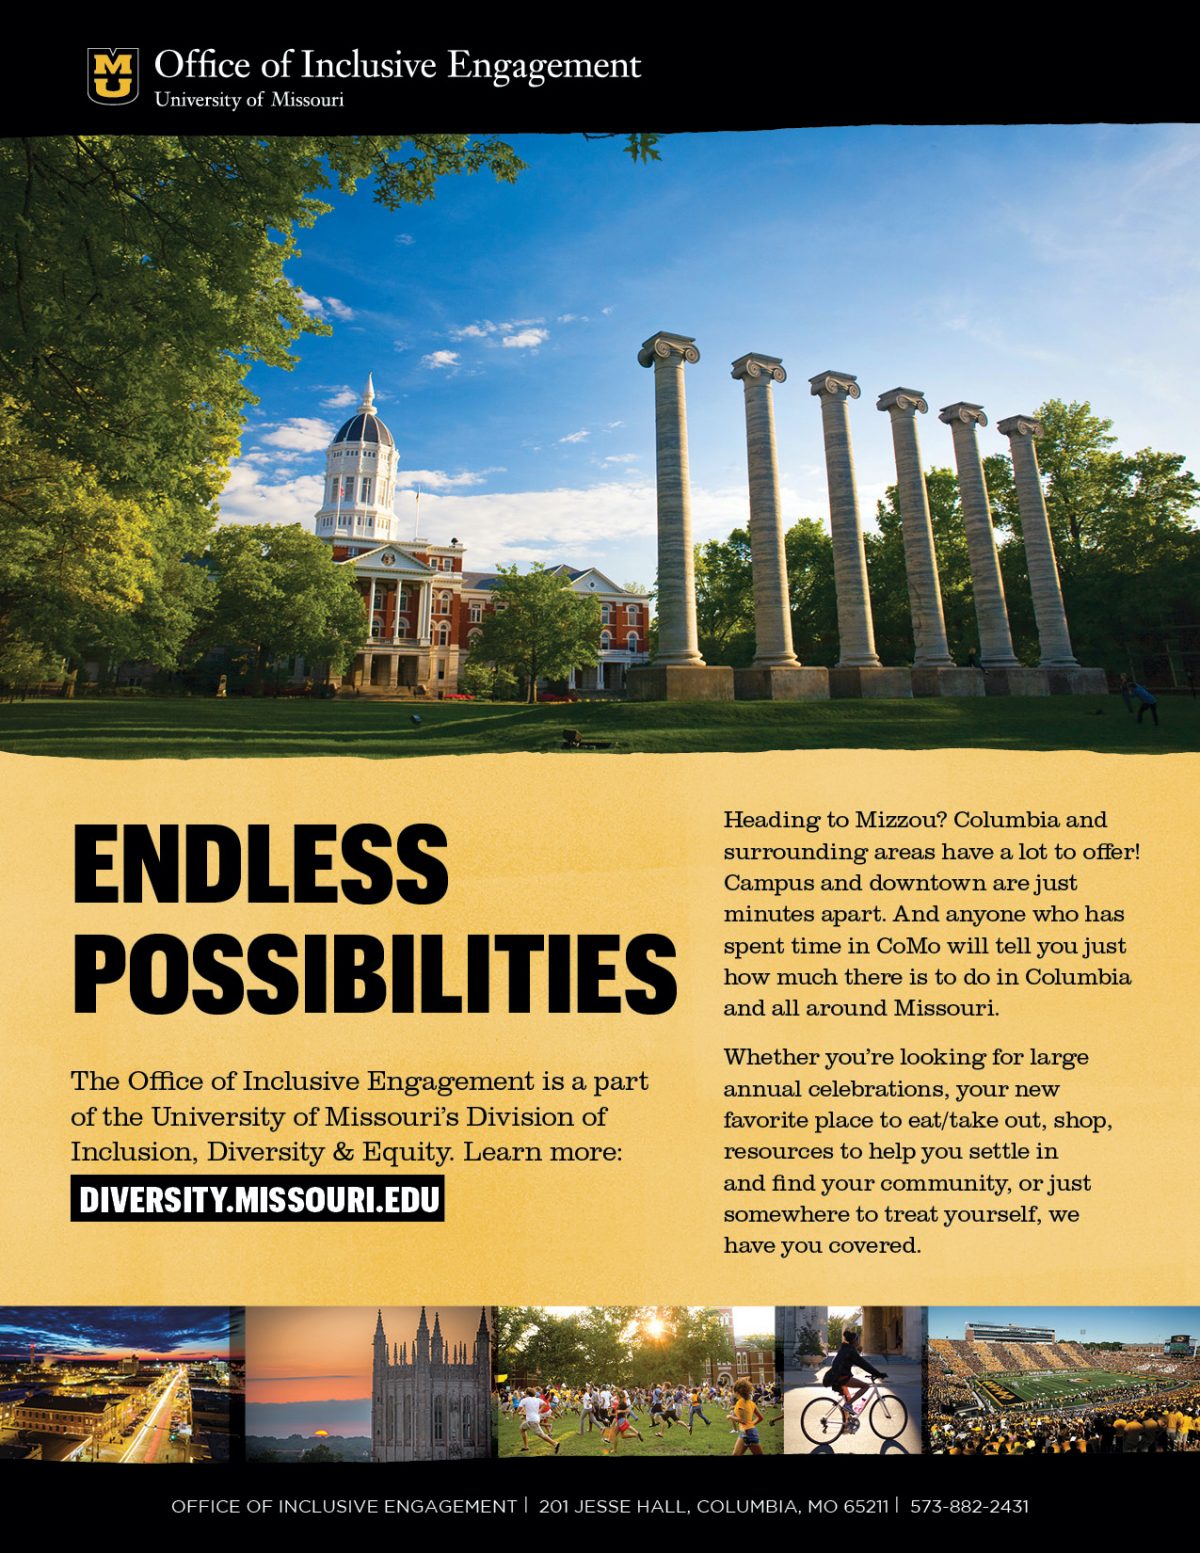 This is the Endless Possibilities brochure, created by the Division of Inclusion, Diversity and Equity.